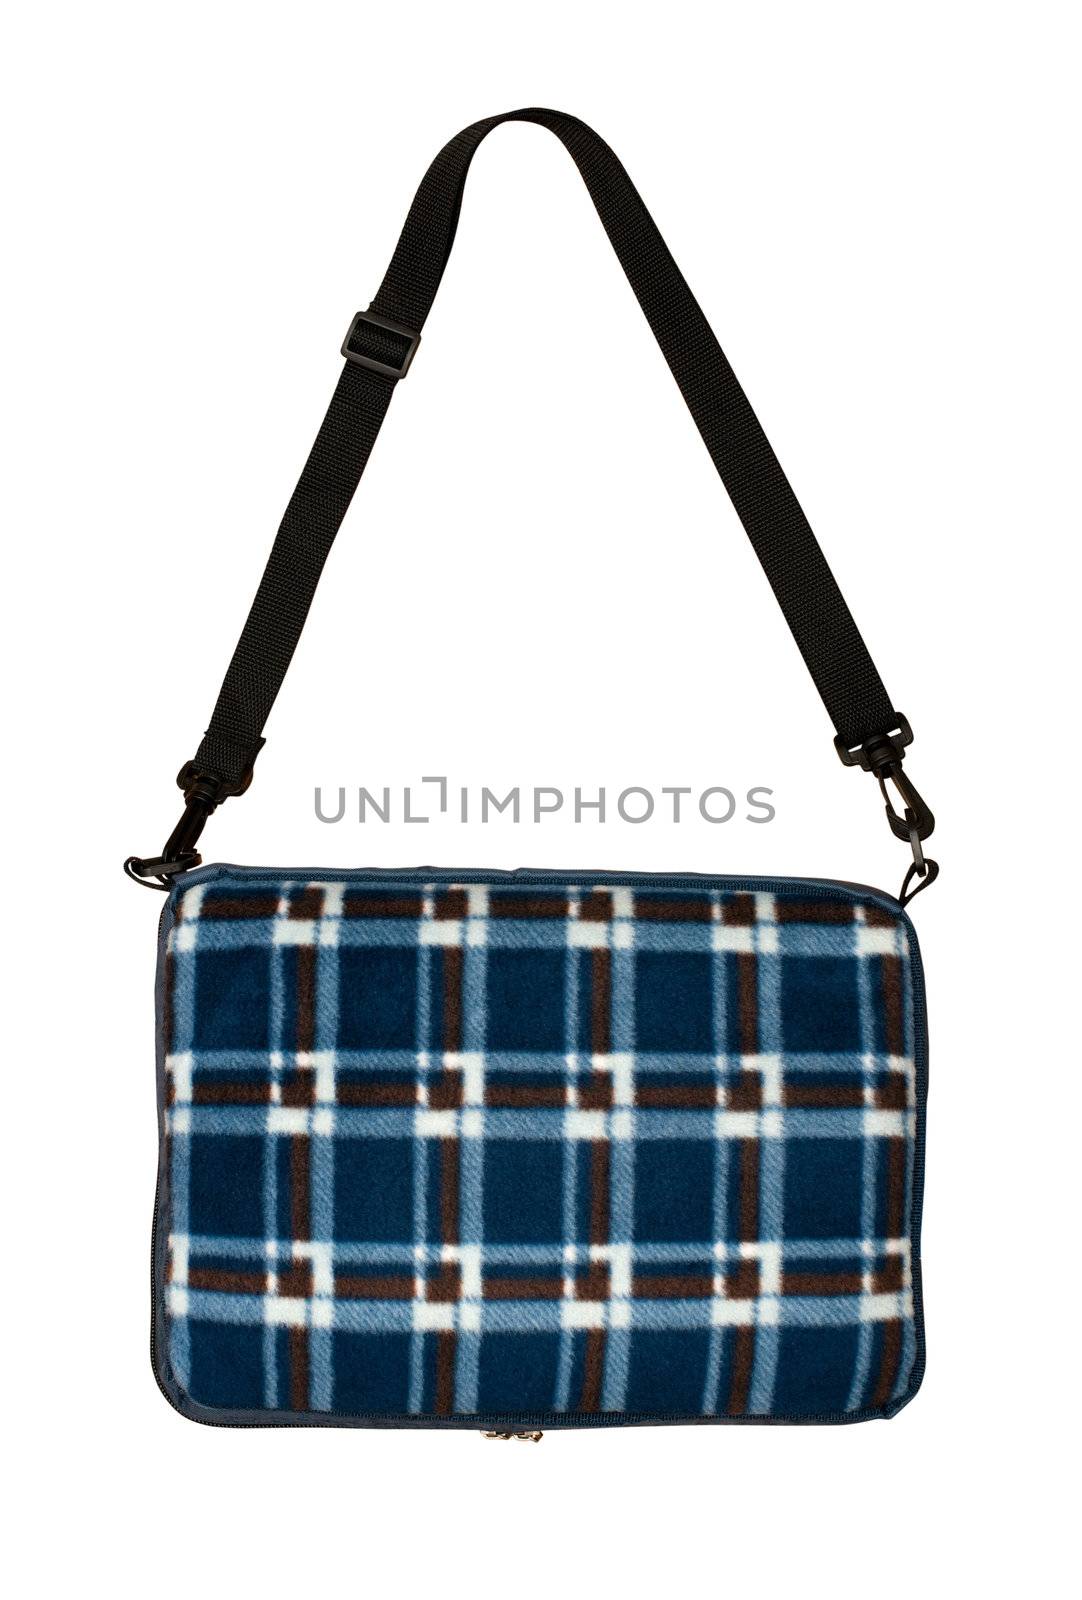 Bag plaid on a white background by DNKSTUDIO